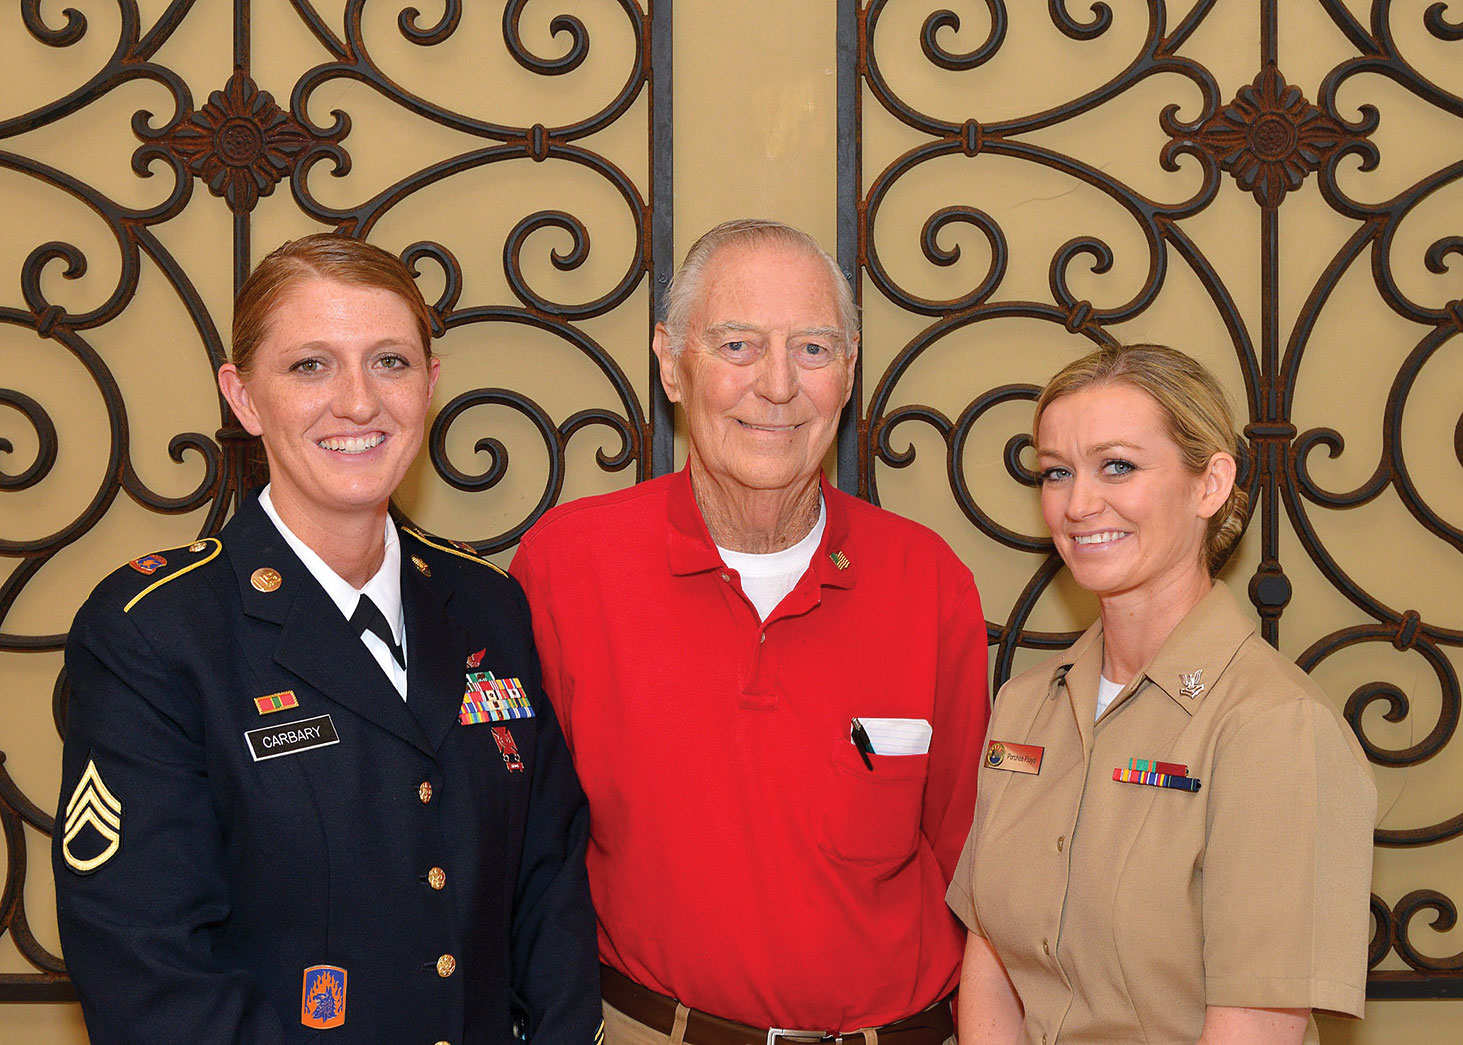 Left to right: Staff Sergeant Jamie Carbary, US Army; George Bidwell, President SaddleBrooke Troop Support and Petty Officer 2nd Class Porchea Geiger, US Navy visit Ladies Day Out.